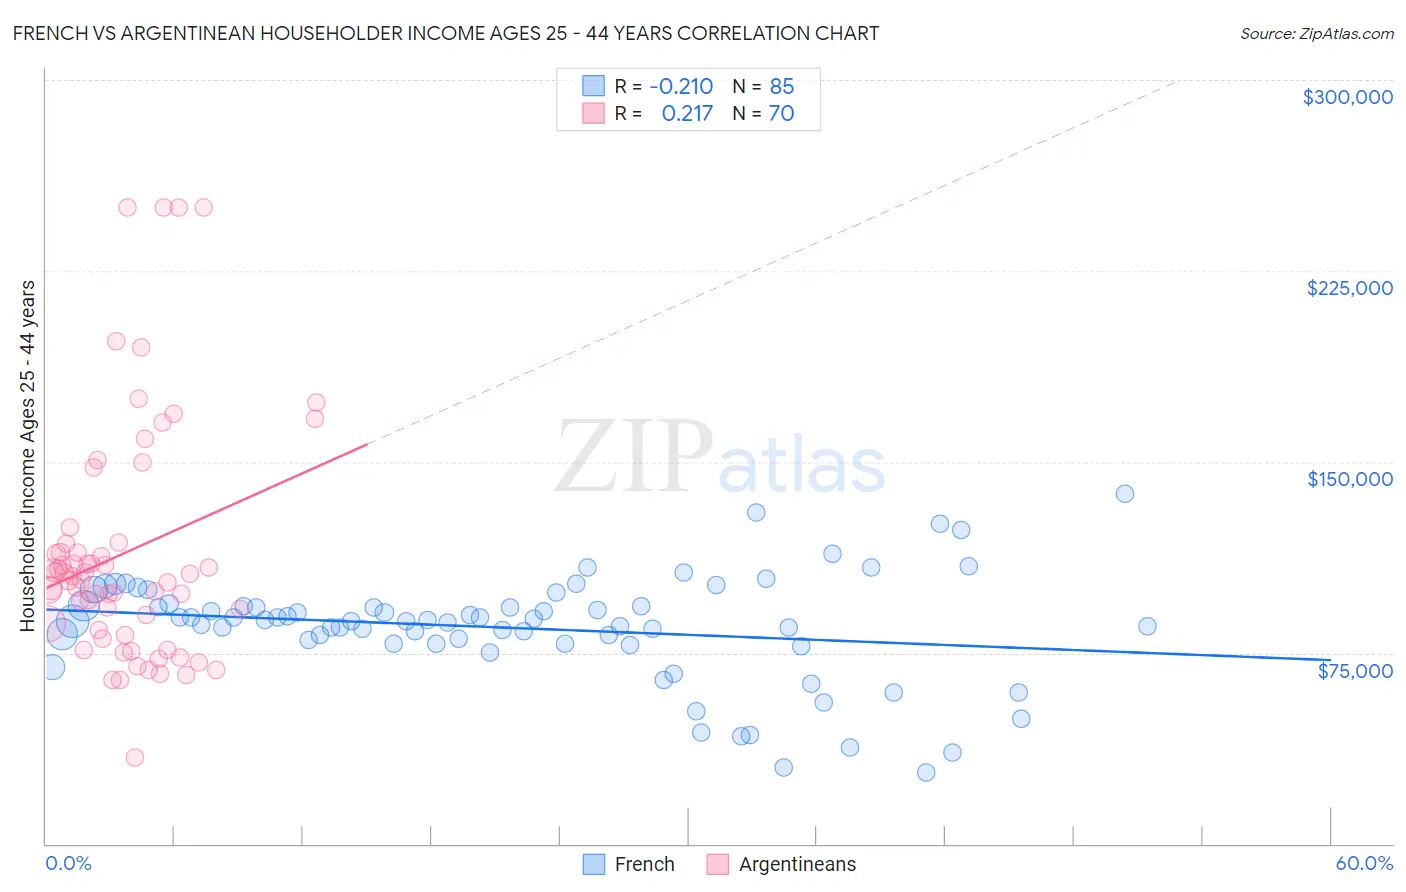 French vs Argentinean Householder Income Ages 25 - 44 years